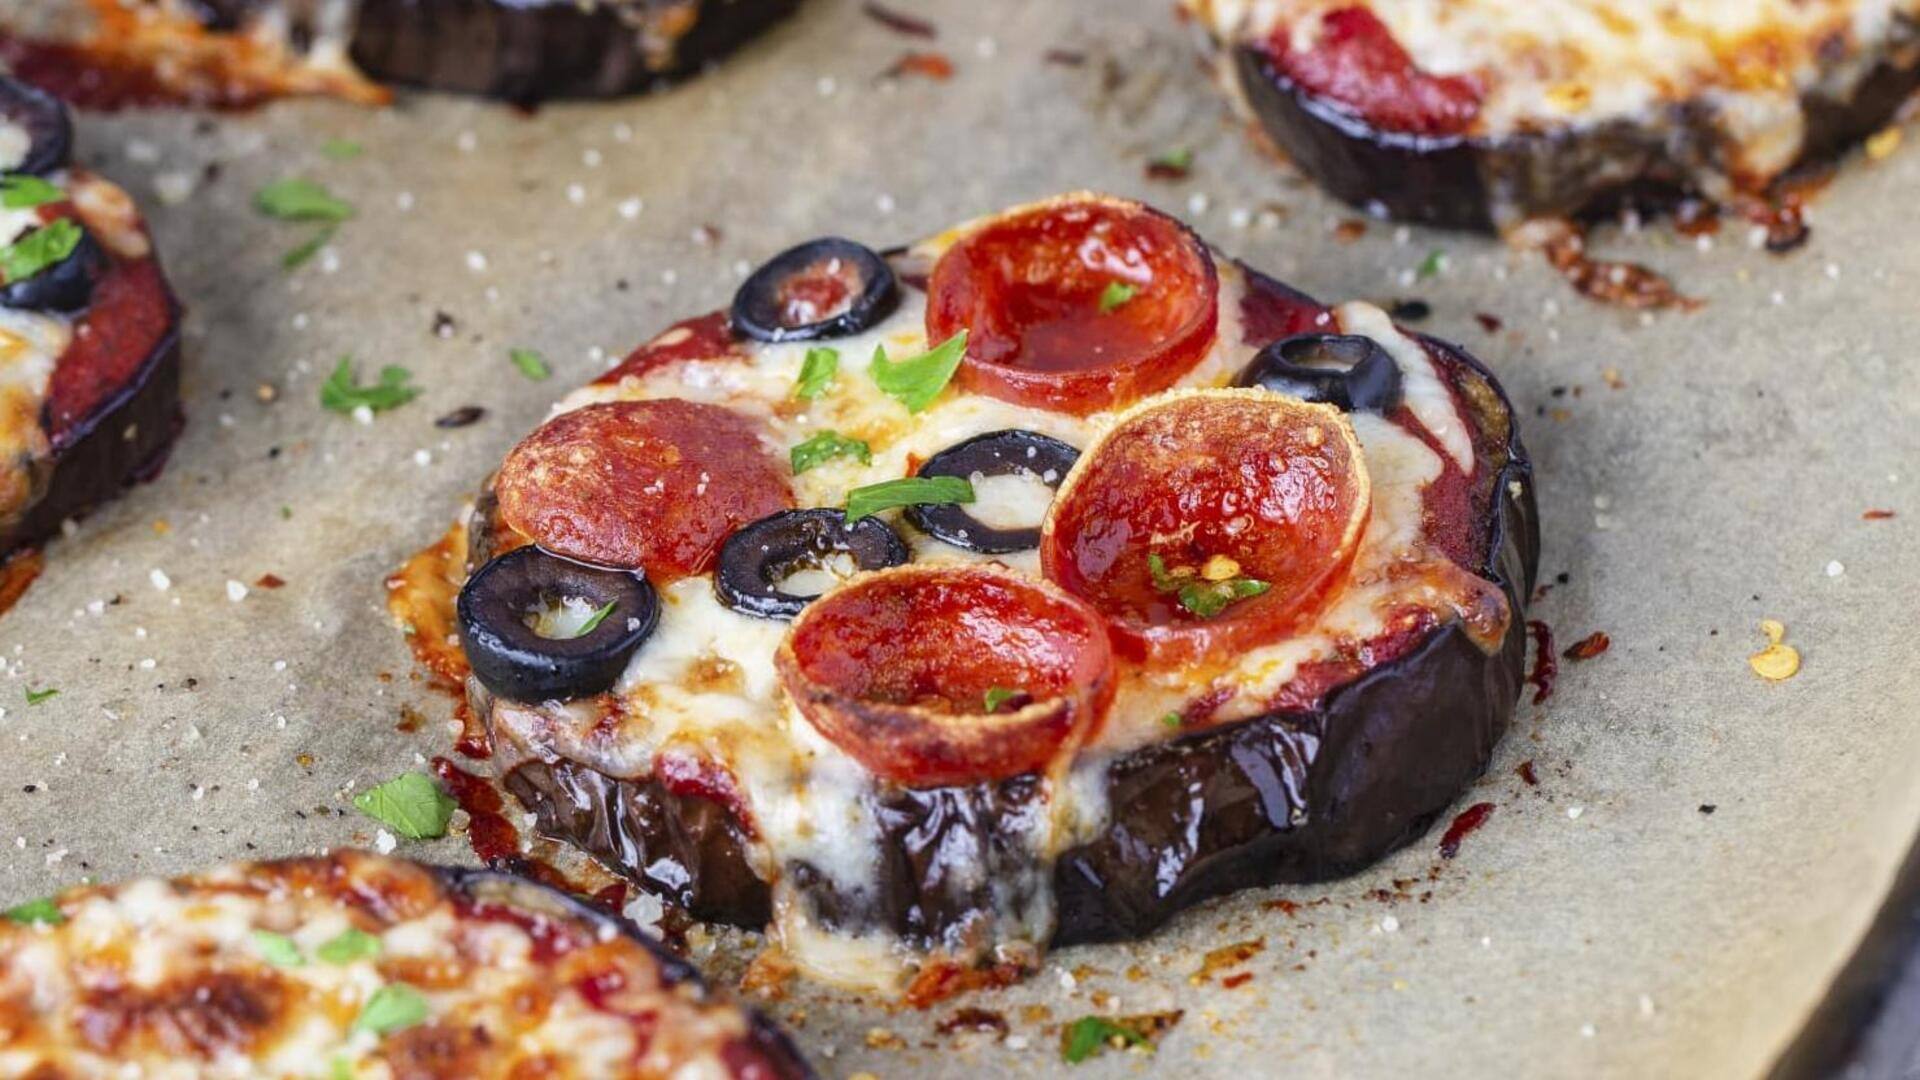 Eggplant pizzas that are all about good health and flavor